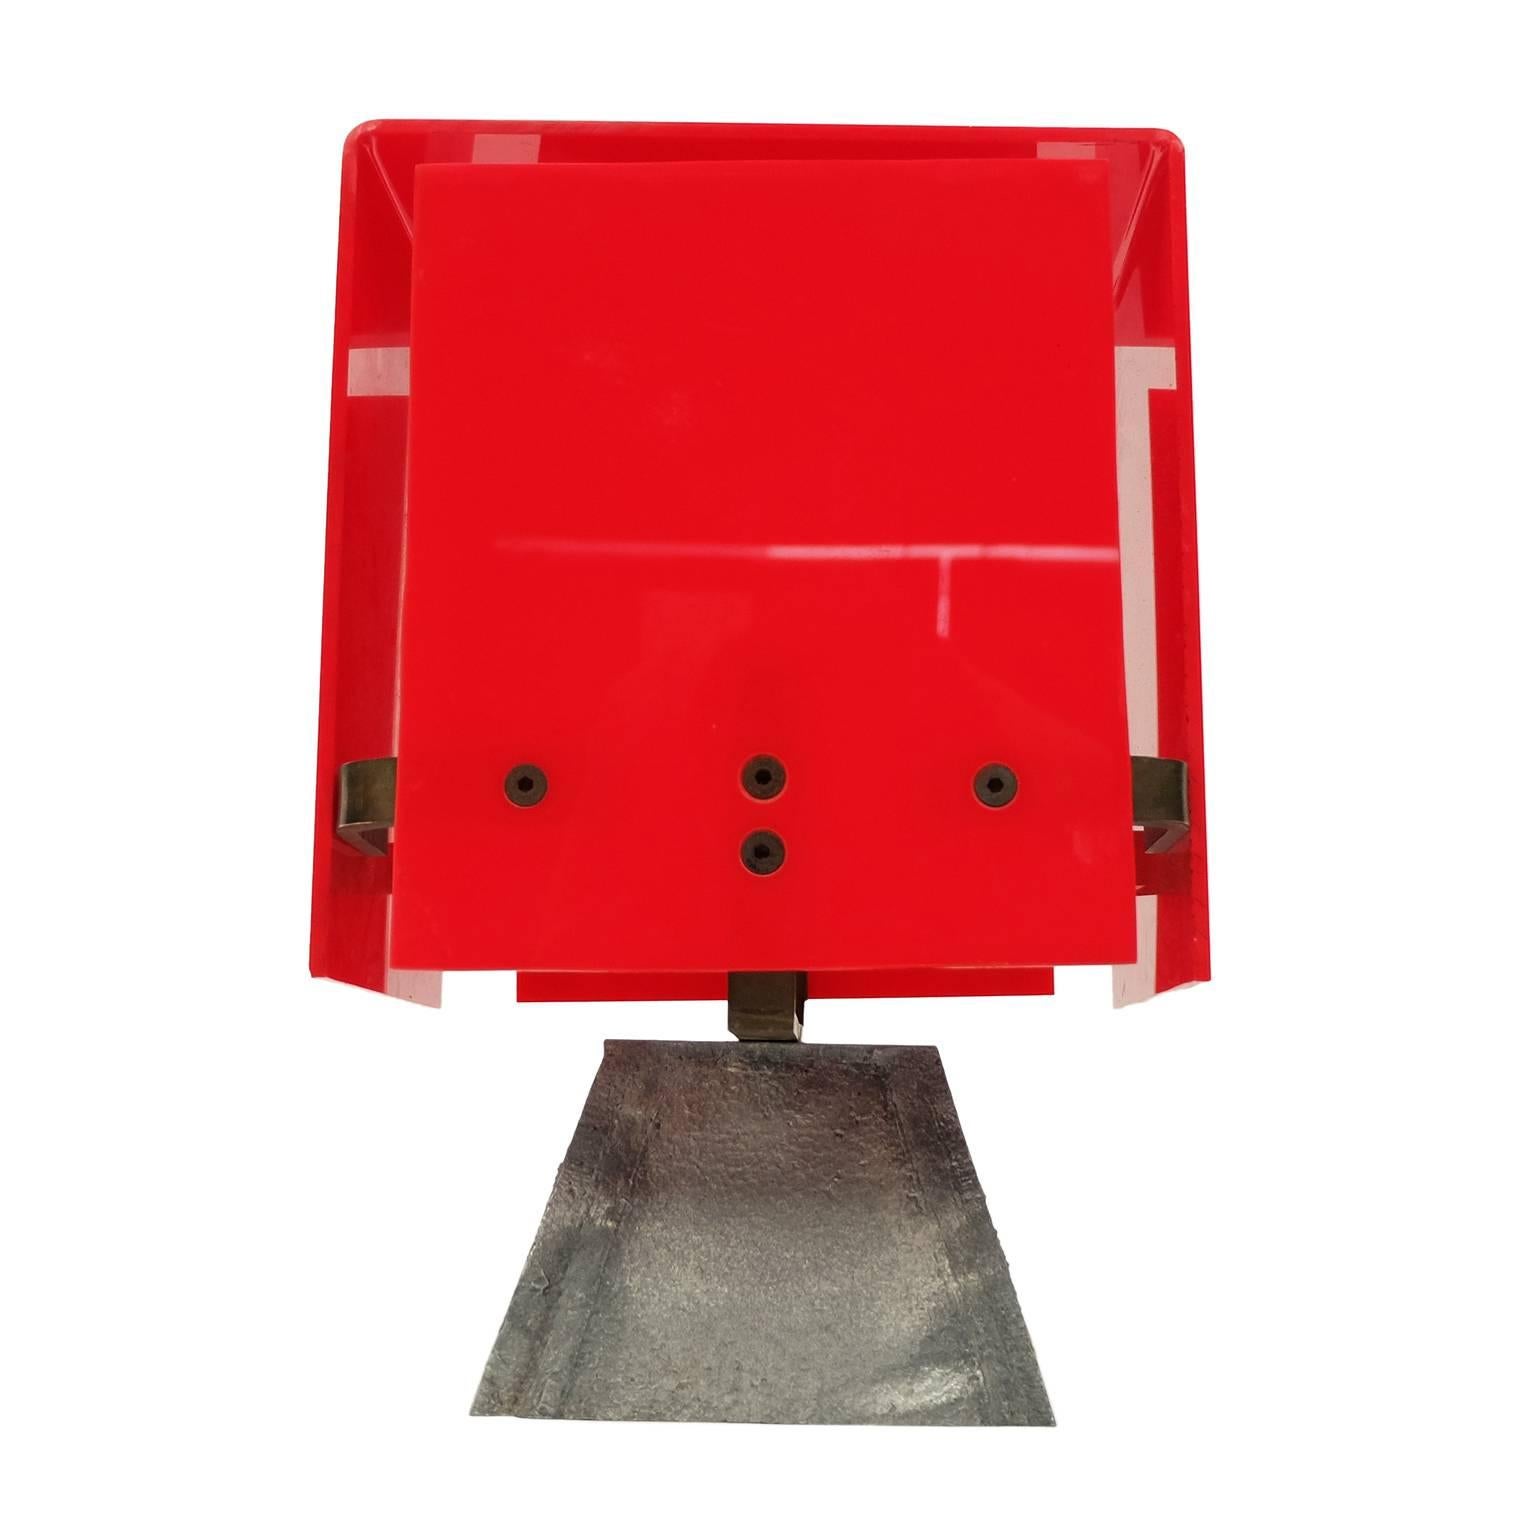 Unusual 1960s modernist table lamp designed and manufactured in England.

Brass frame and fitting with red acrylic shade. Cast alloy base.

  